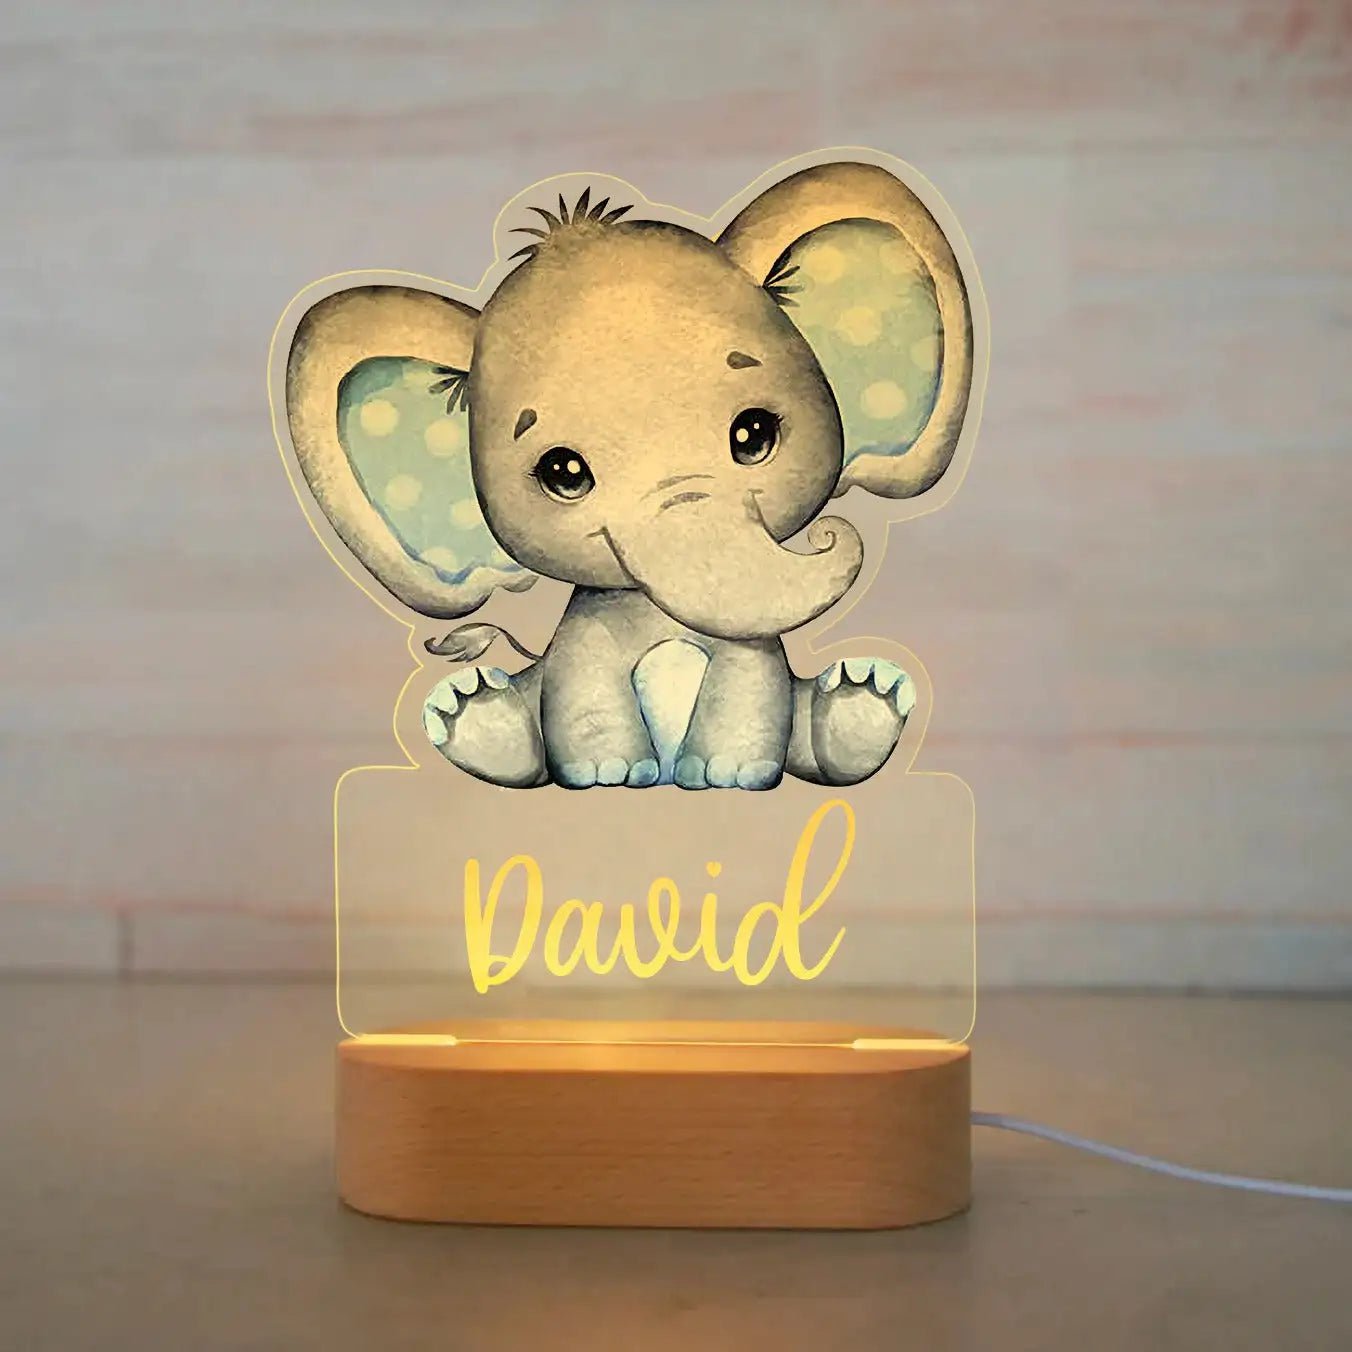 Customized Animal-themed Night Light for Kids - Personalized with Child's Name, Acrylic Lamp for Bedroom Decor Warm Light / 01Elephant